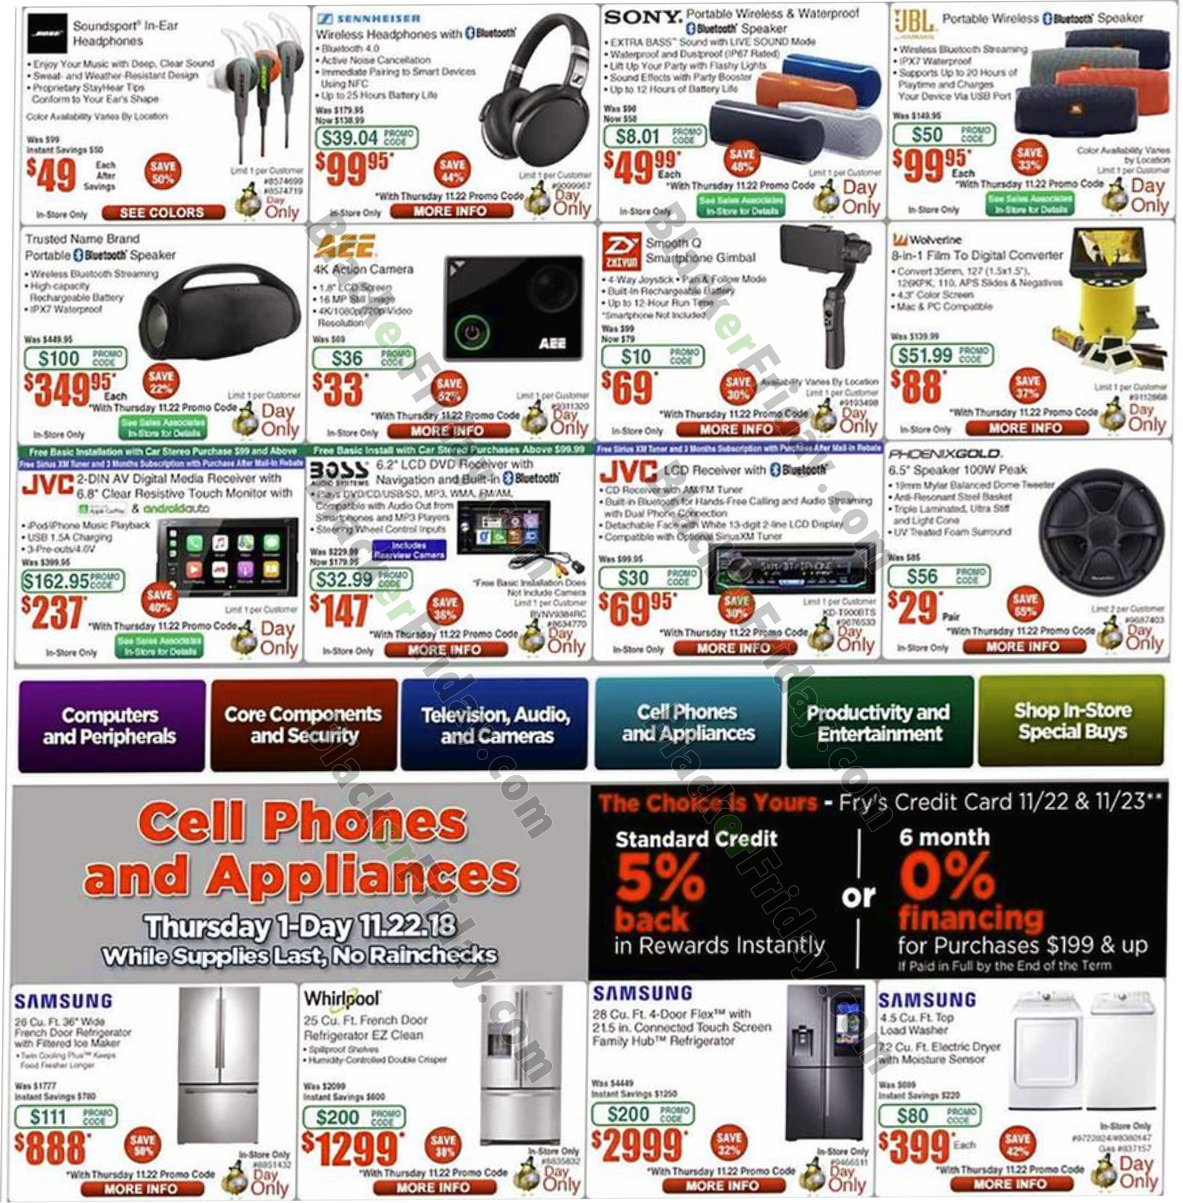 Fry's Electronics Black Friday 2020 - What to Expect ...